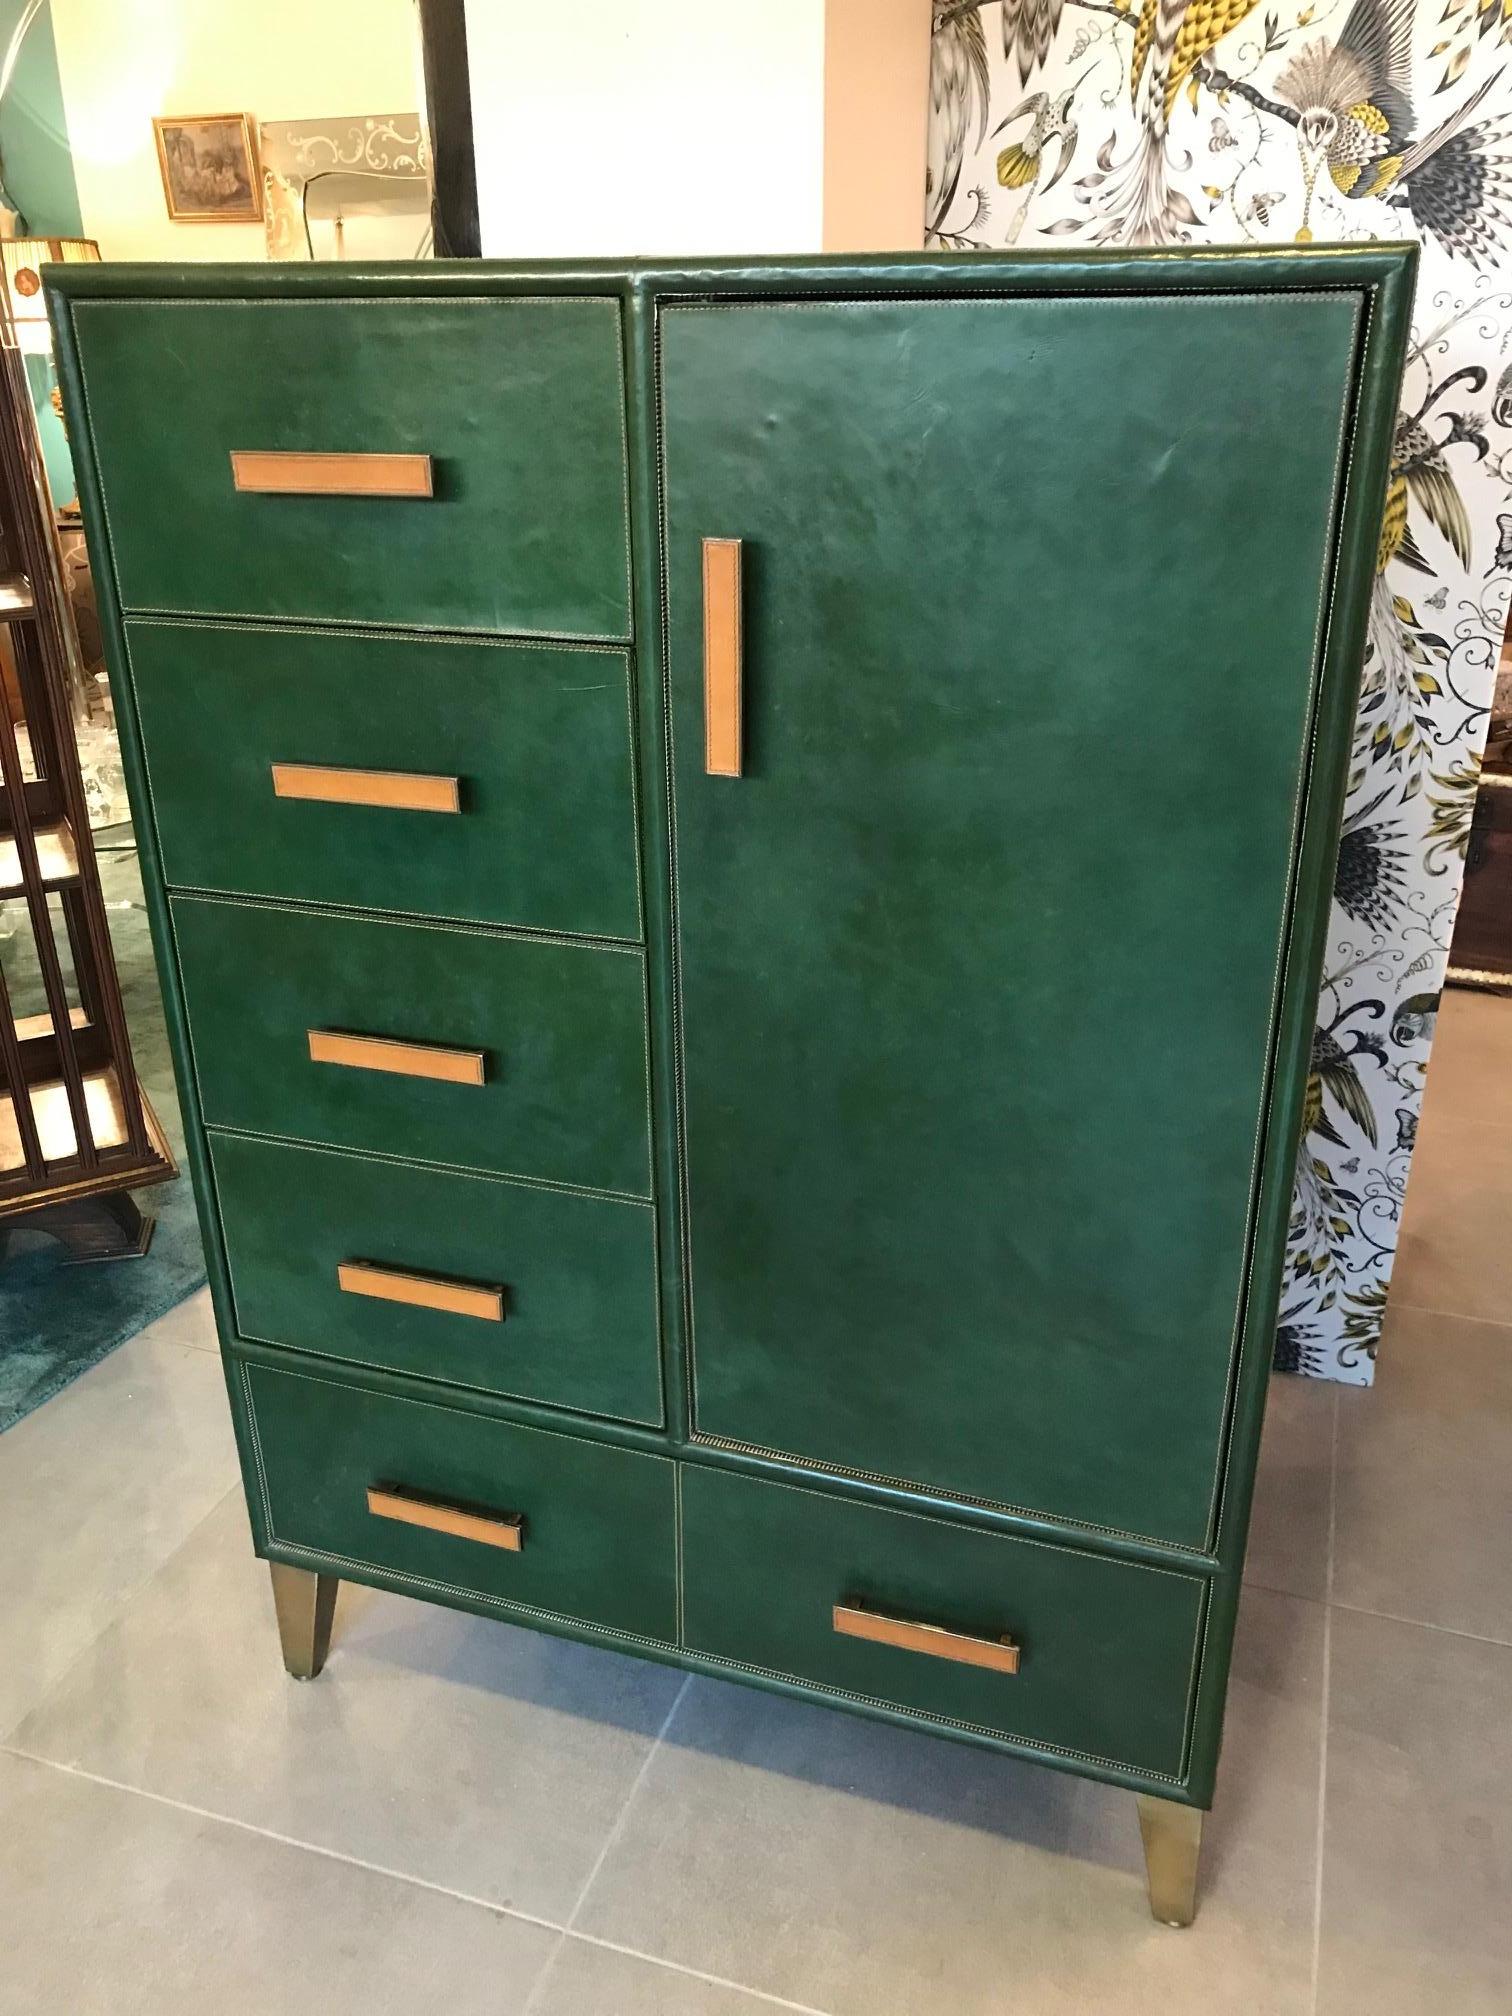 Beautiful 20th century Italian chest of drawers covered with a nice green leather and brown stitching. Brass and leather handles. Six drawers and one door that could be used as a wardrobe. The inside is covered with a stripe fabric. Gilded brass